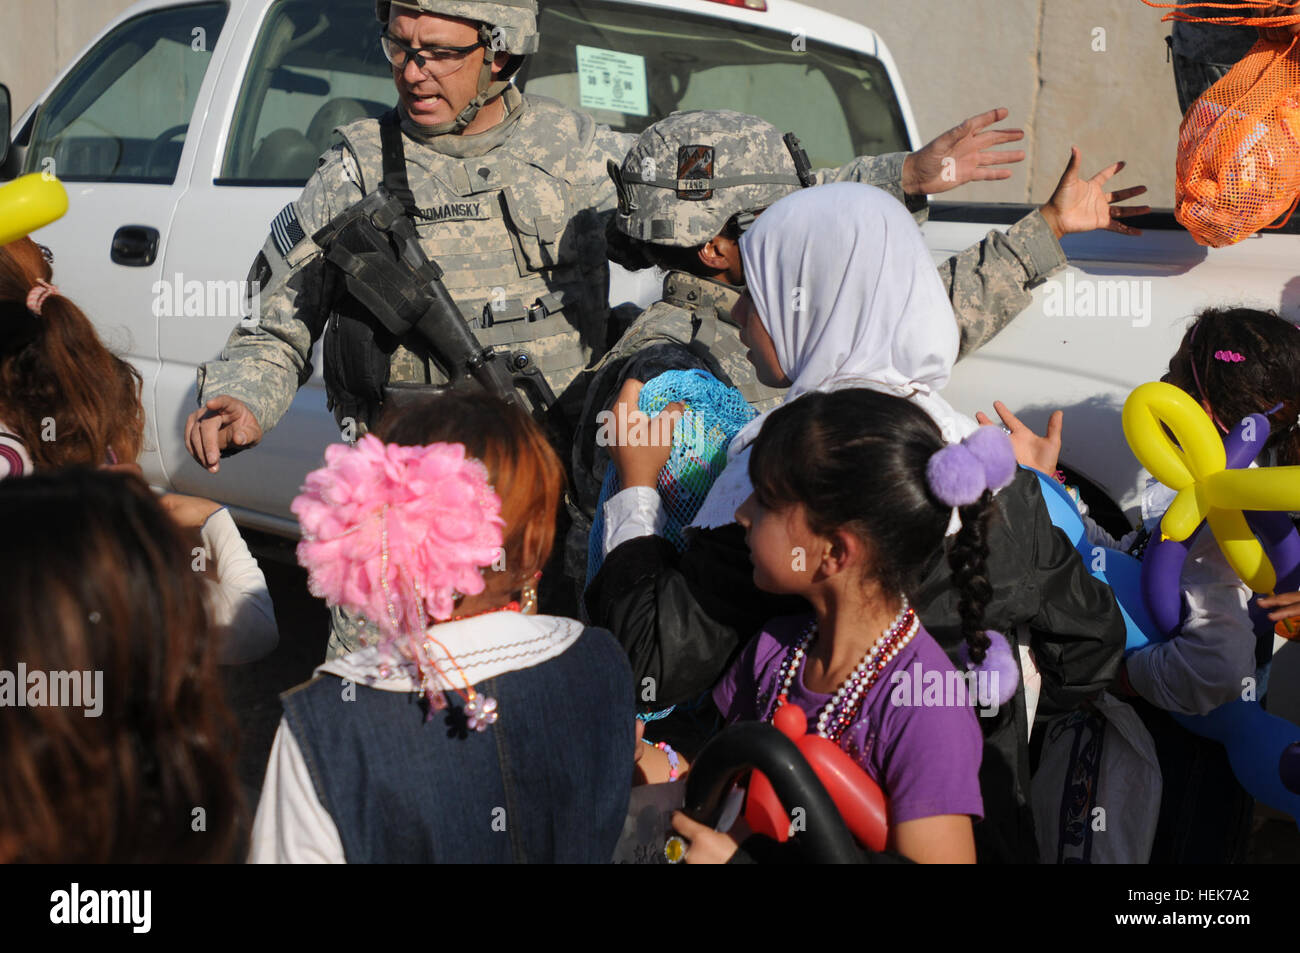 Spc. John Romansky, Combat Engineer, 229th Multiple Role Bridge Company, 36th Engineer Brigade, hands out sandals as part of 'Operation Flip Flop' to Iraqi children during Iraqi Kids Day on Joint Base Balad. Iraqi Kids Day- Operation Flip-Flop 340112 Stock Photo